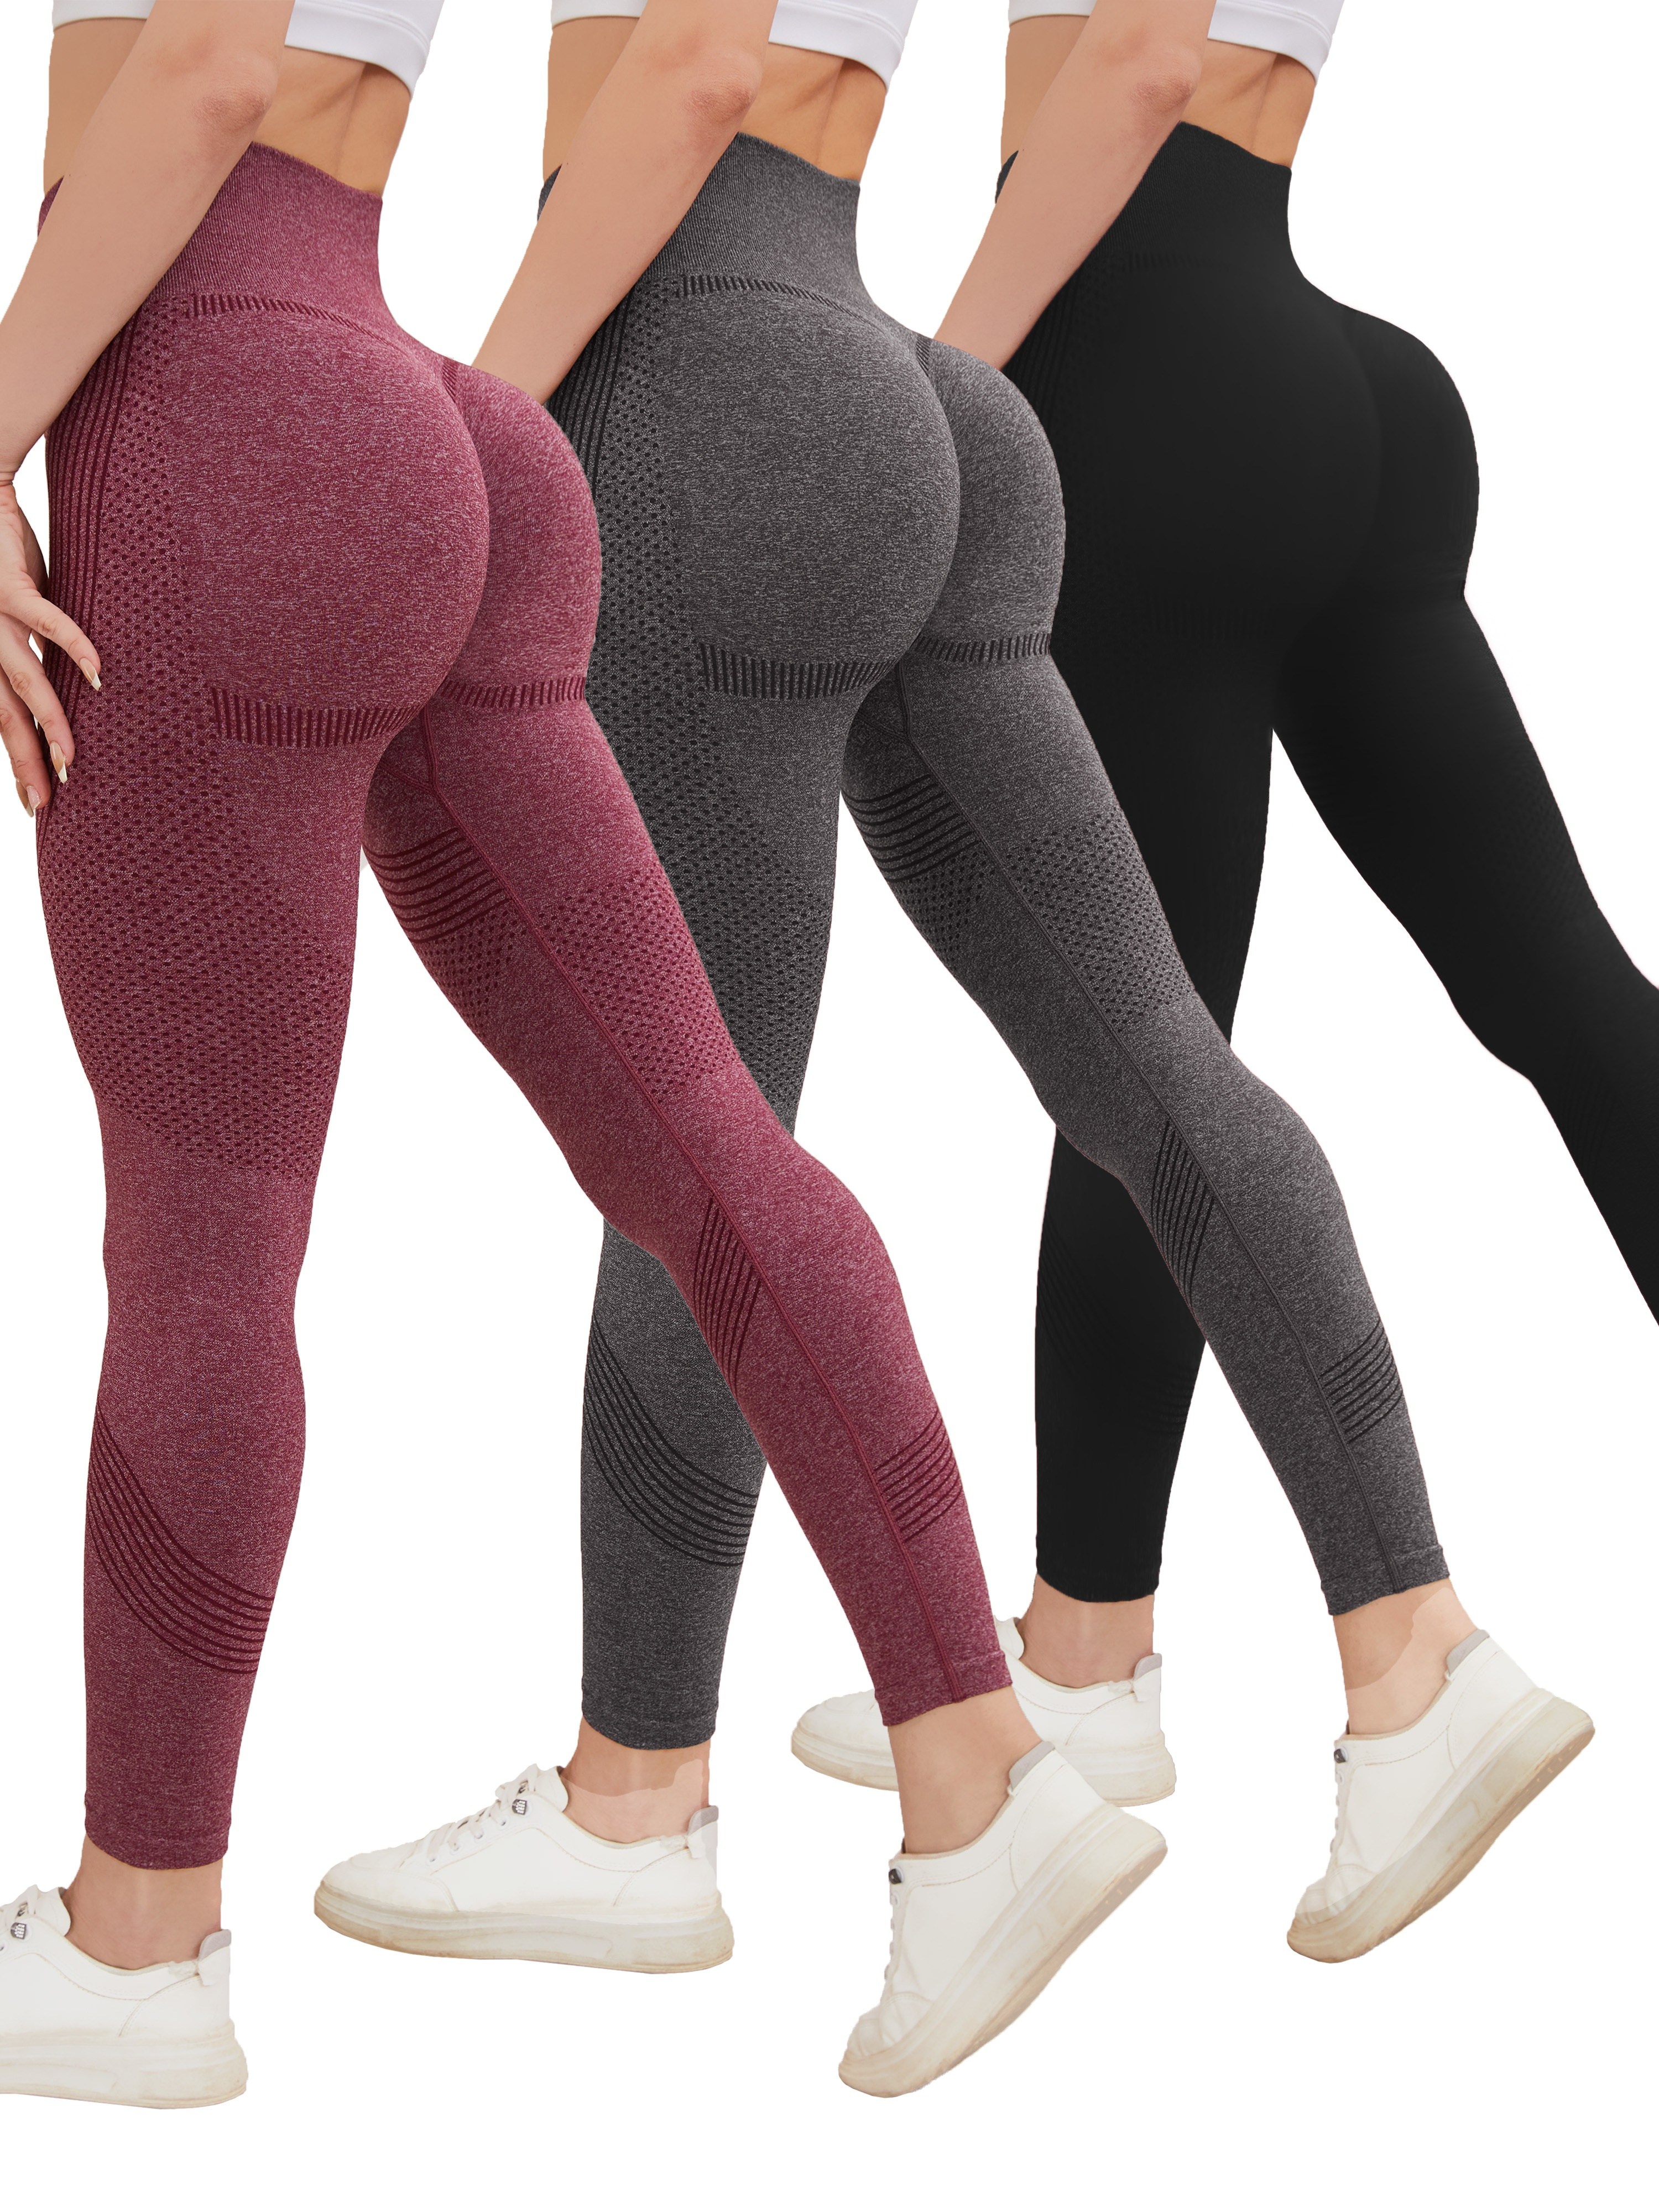  Smile Contour Brown Seamless Leggings For Women High Waist  Butt Lift Workout Yoga Pants Scrunch Booty Gym Tights